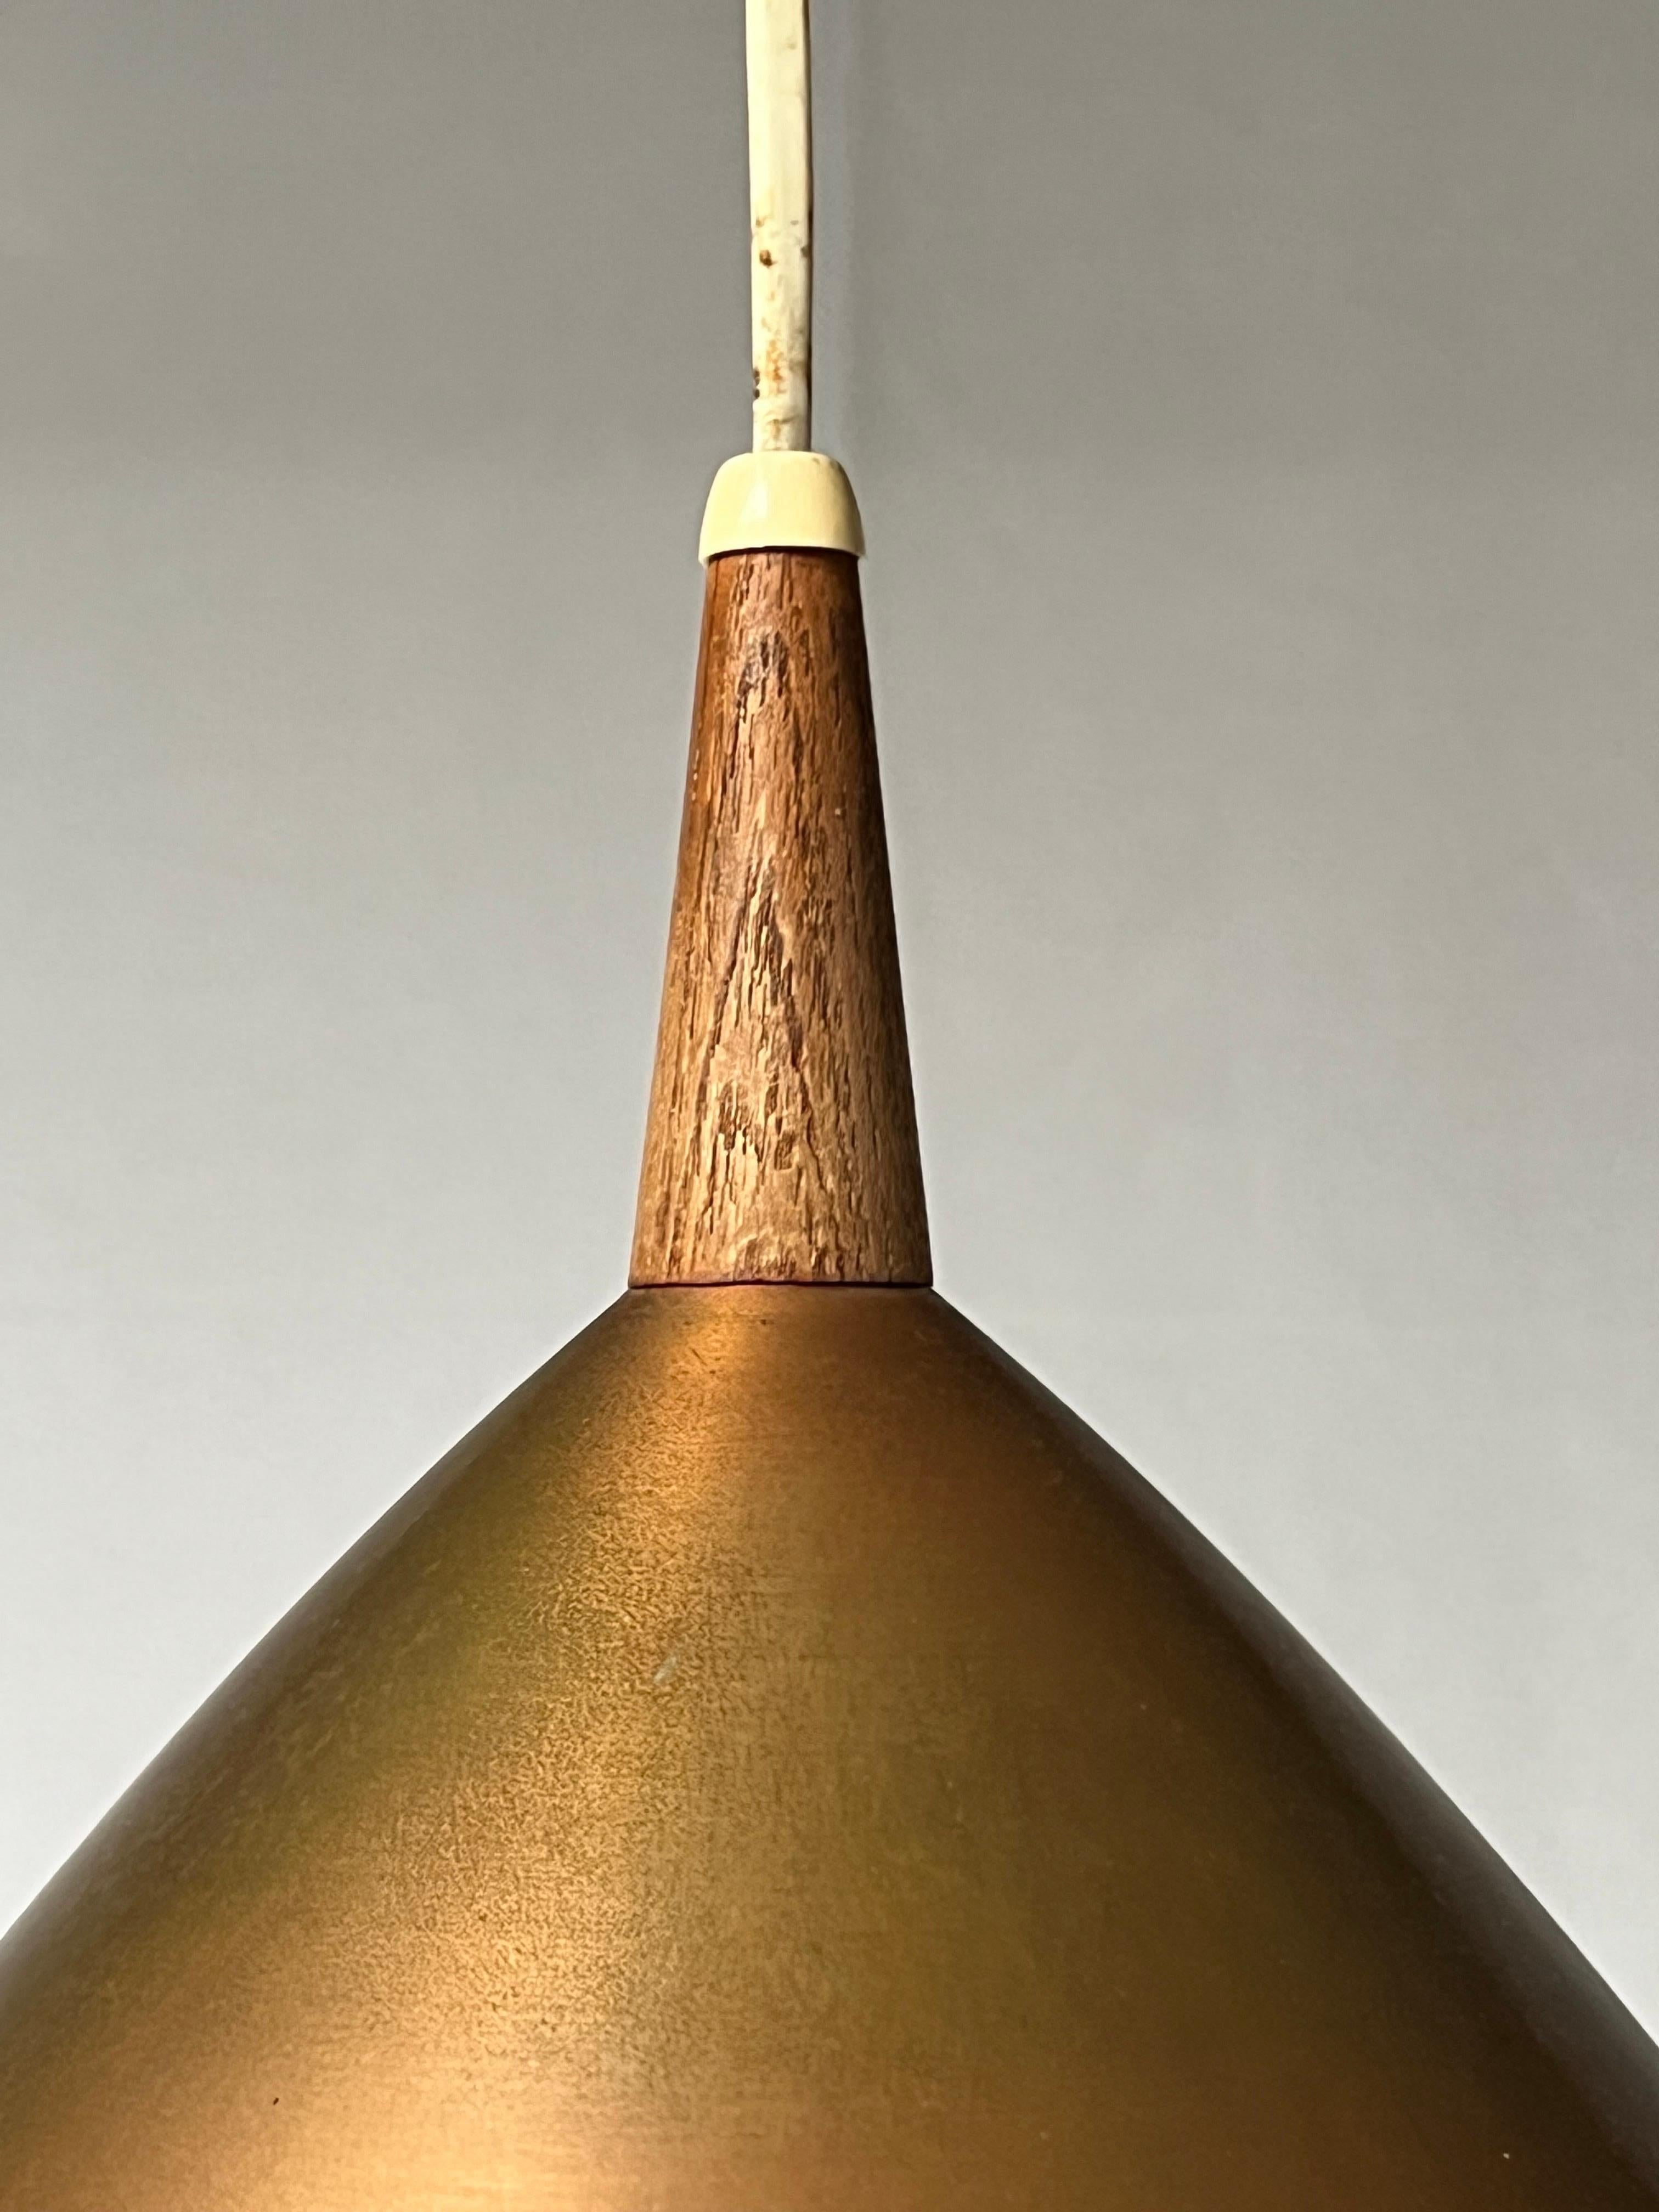 Hand-Crafted Hans Agne Jakobsson Copper suspension Lamp, Midcentury from Sweden 1950's For Sale